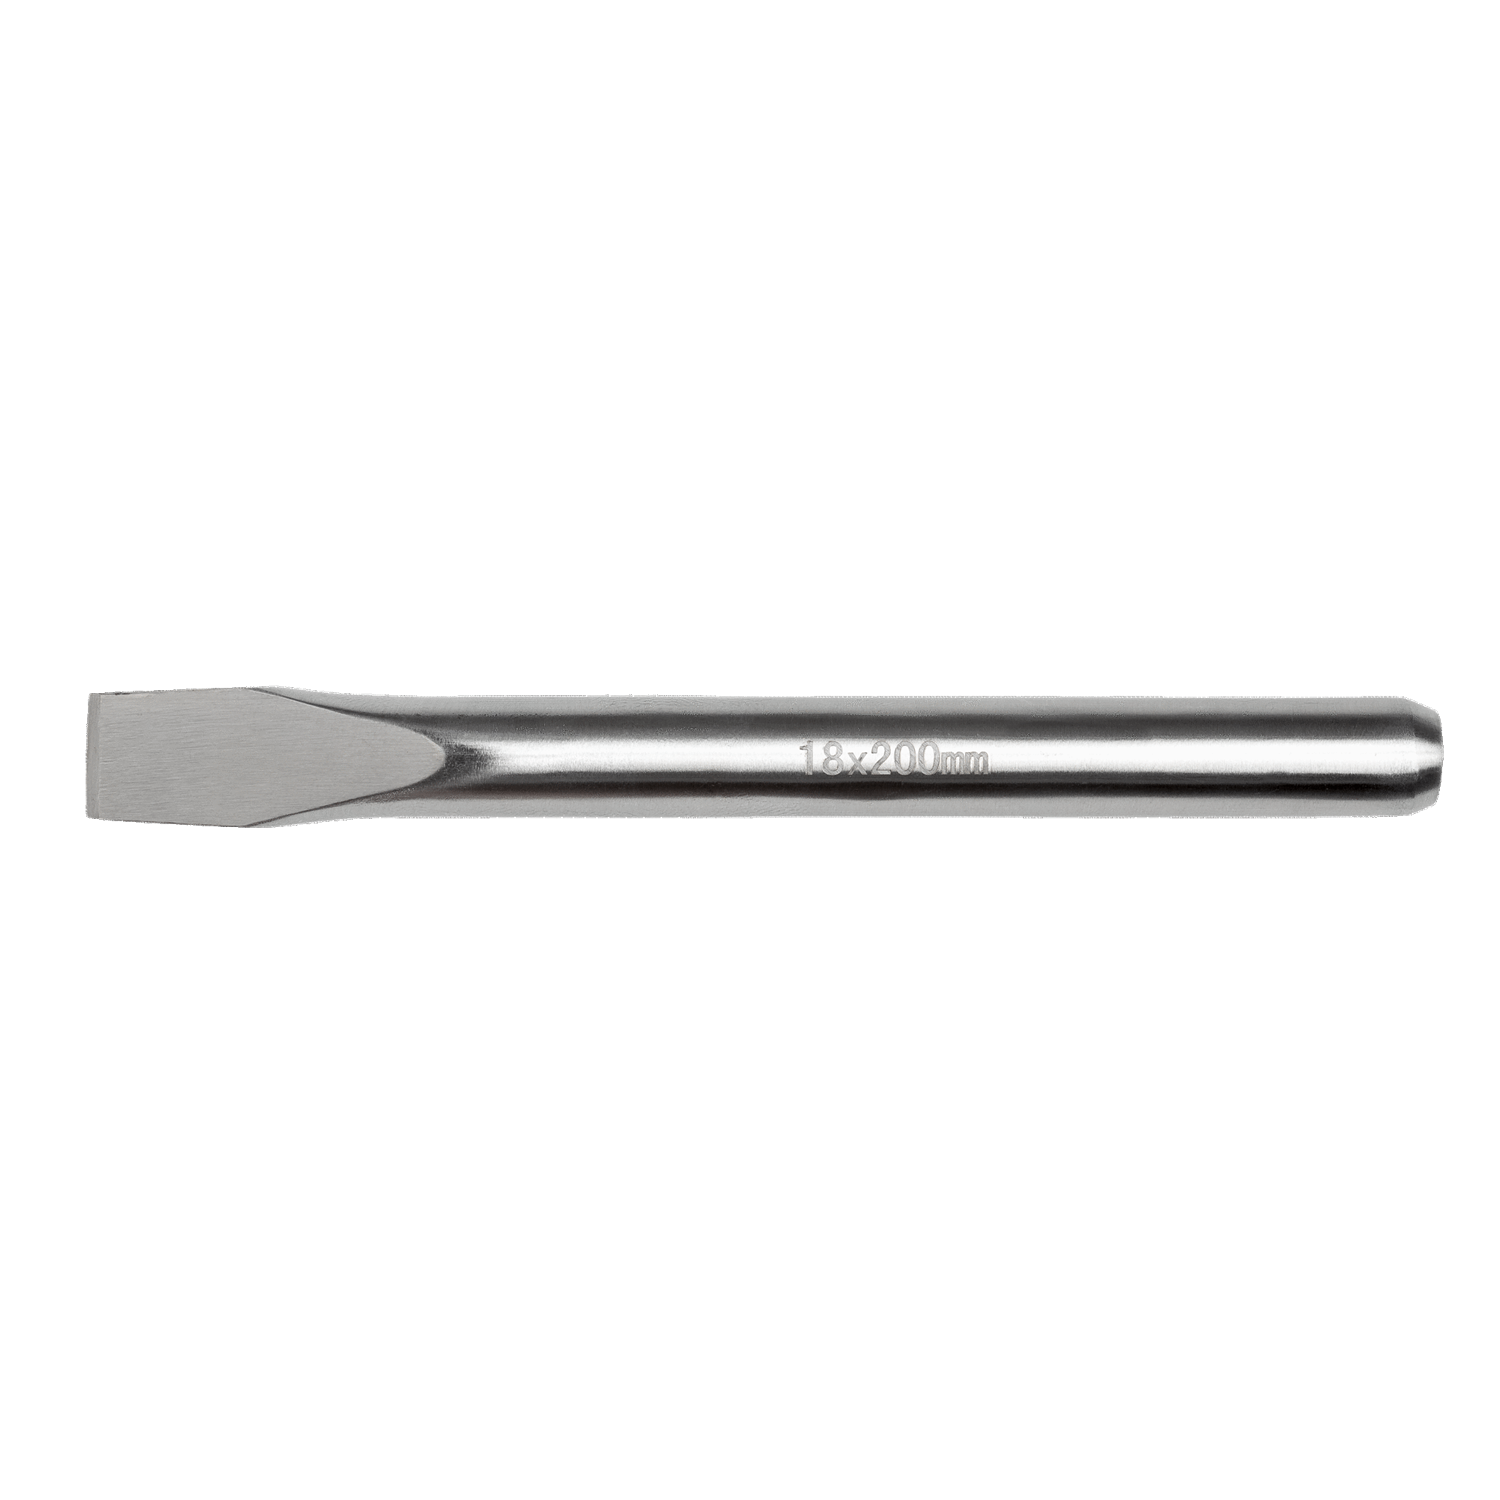 BAHCO SS610 Stainless Steel 55° Flat Chisel with Oval Form - Premium Flat Chisel from BAHCO - Shop now at Yew Aik.